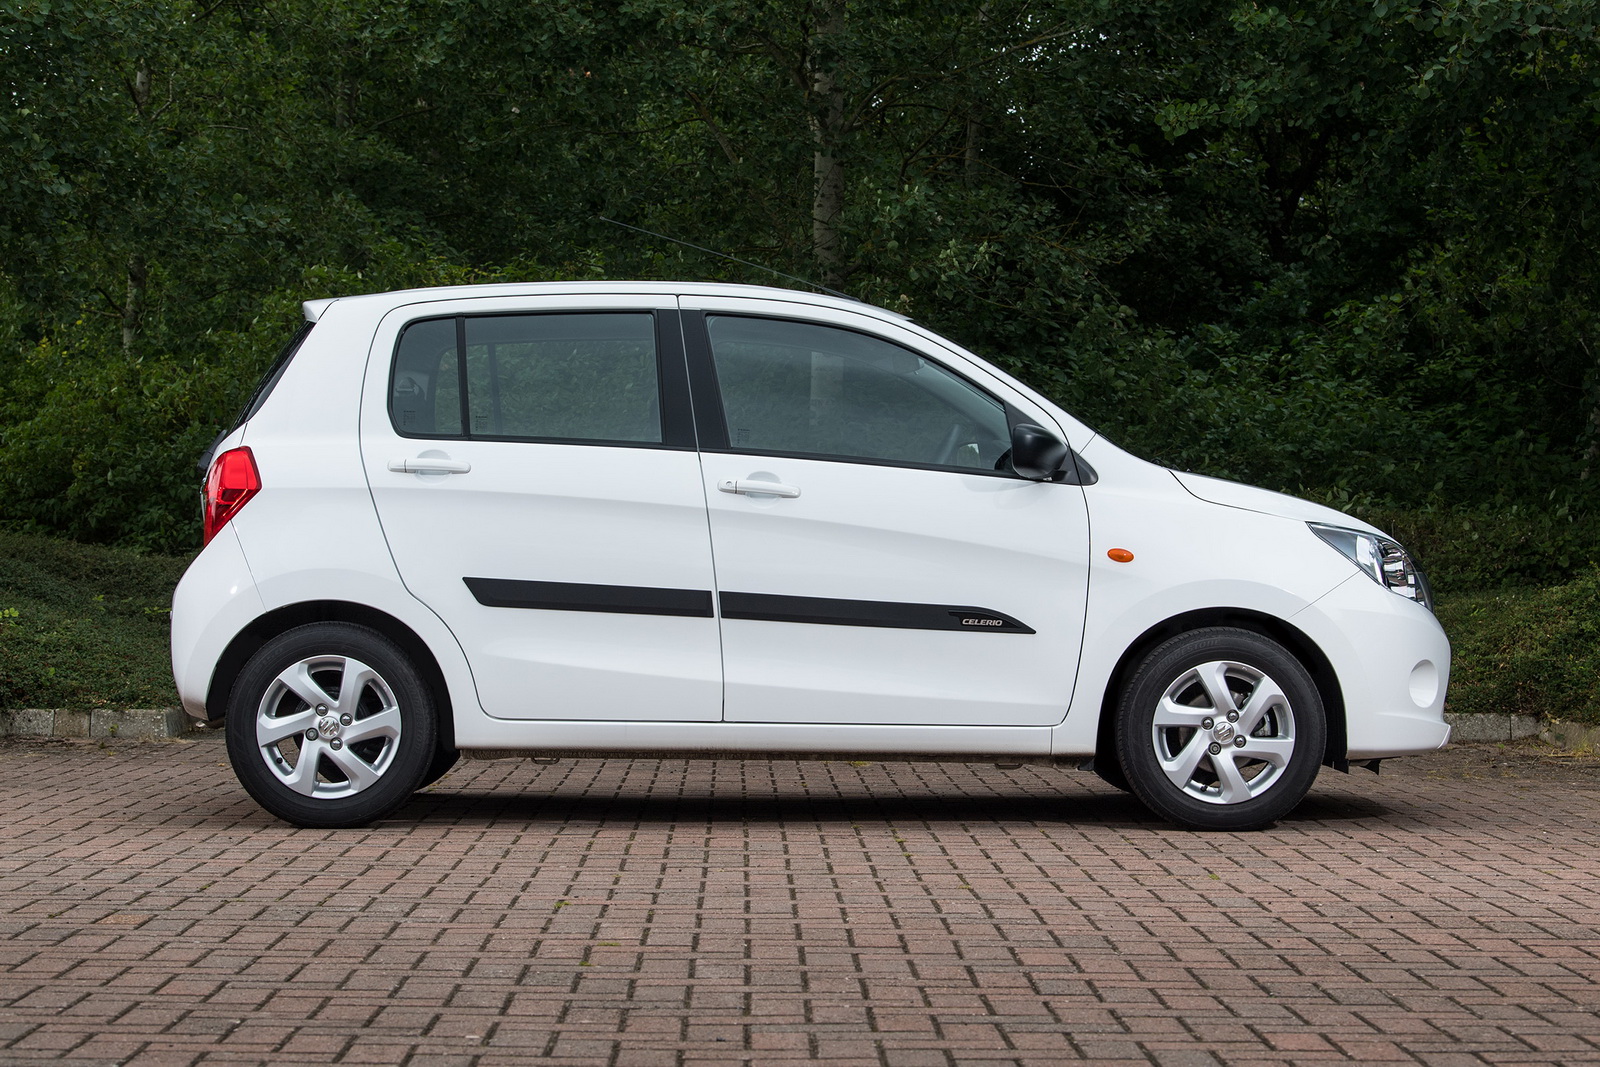 Suzuki Celerio City Brings More Standard Kit To The Uk From 7 499 Carscoops